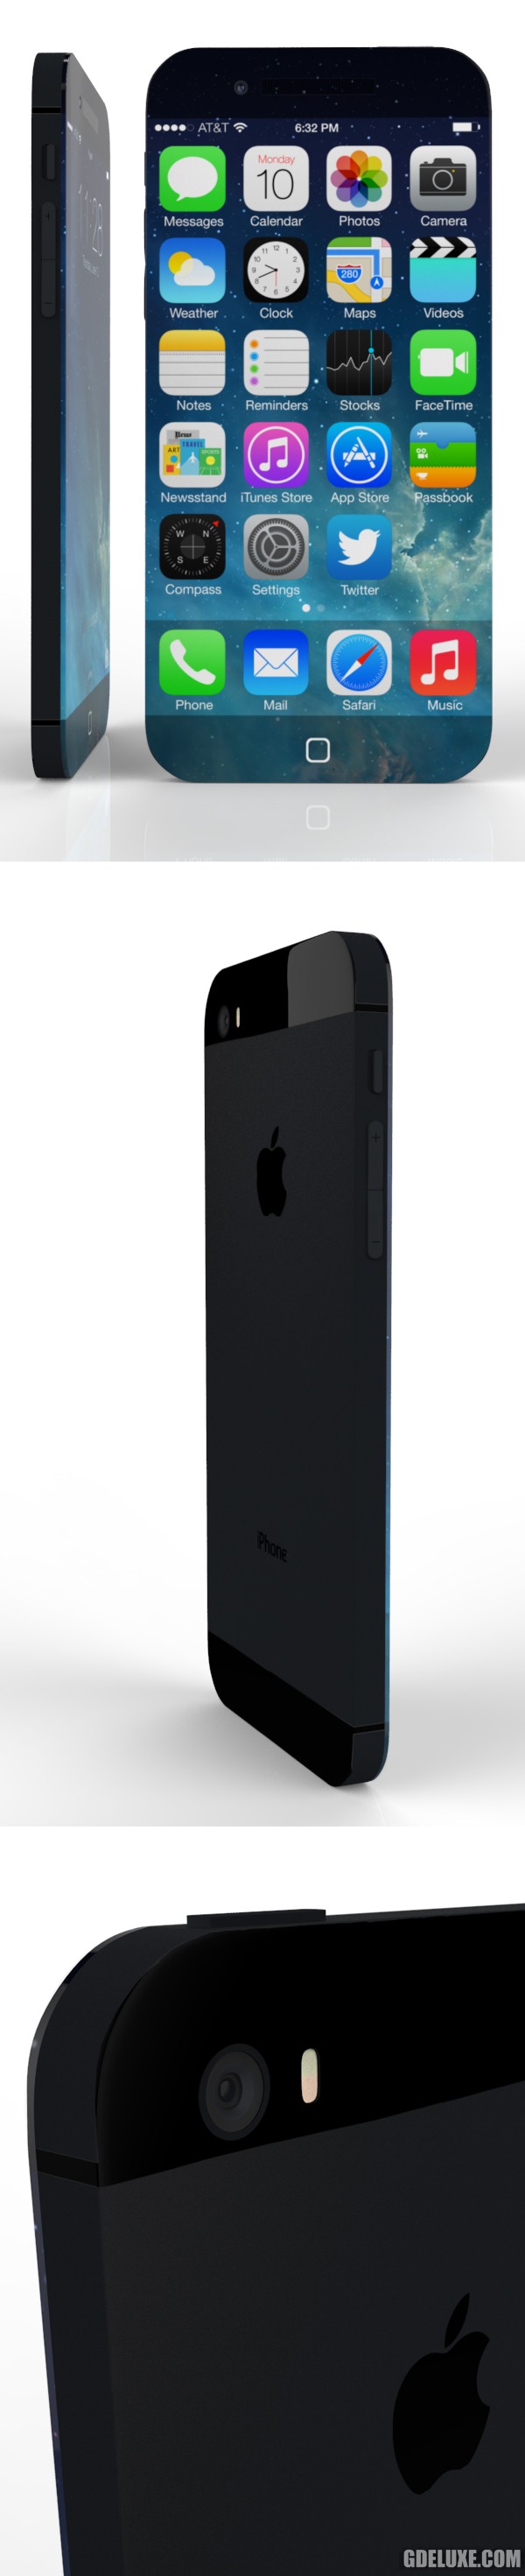 iPhone-6-Space-Grey.png